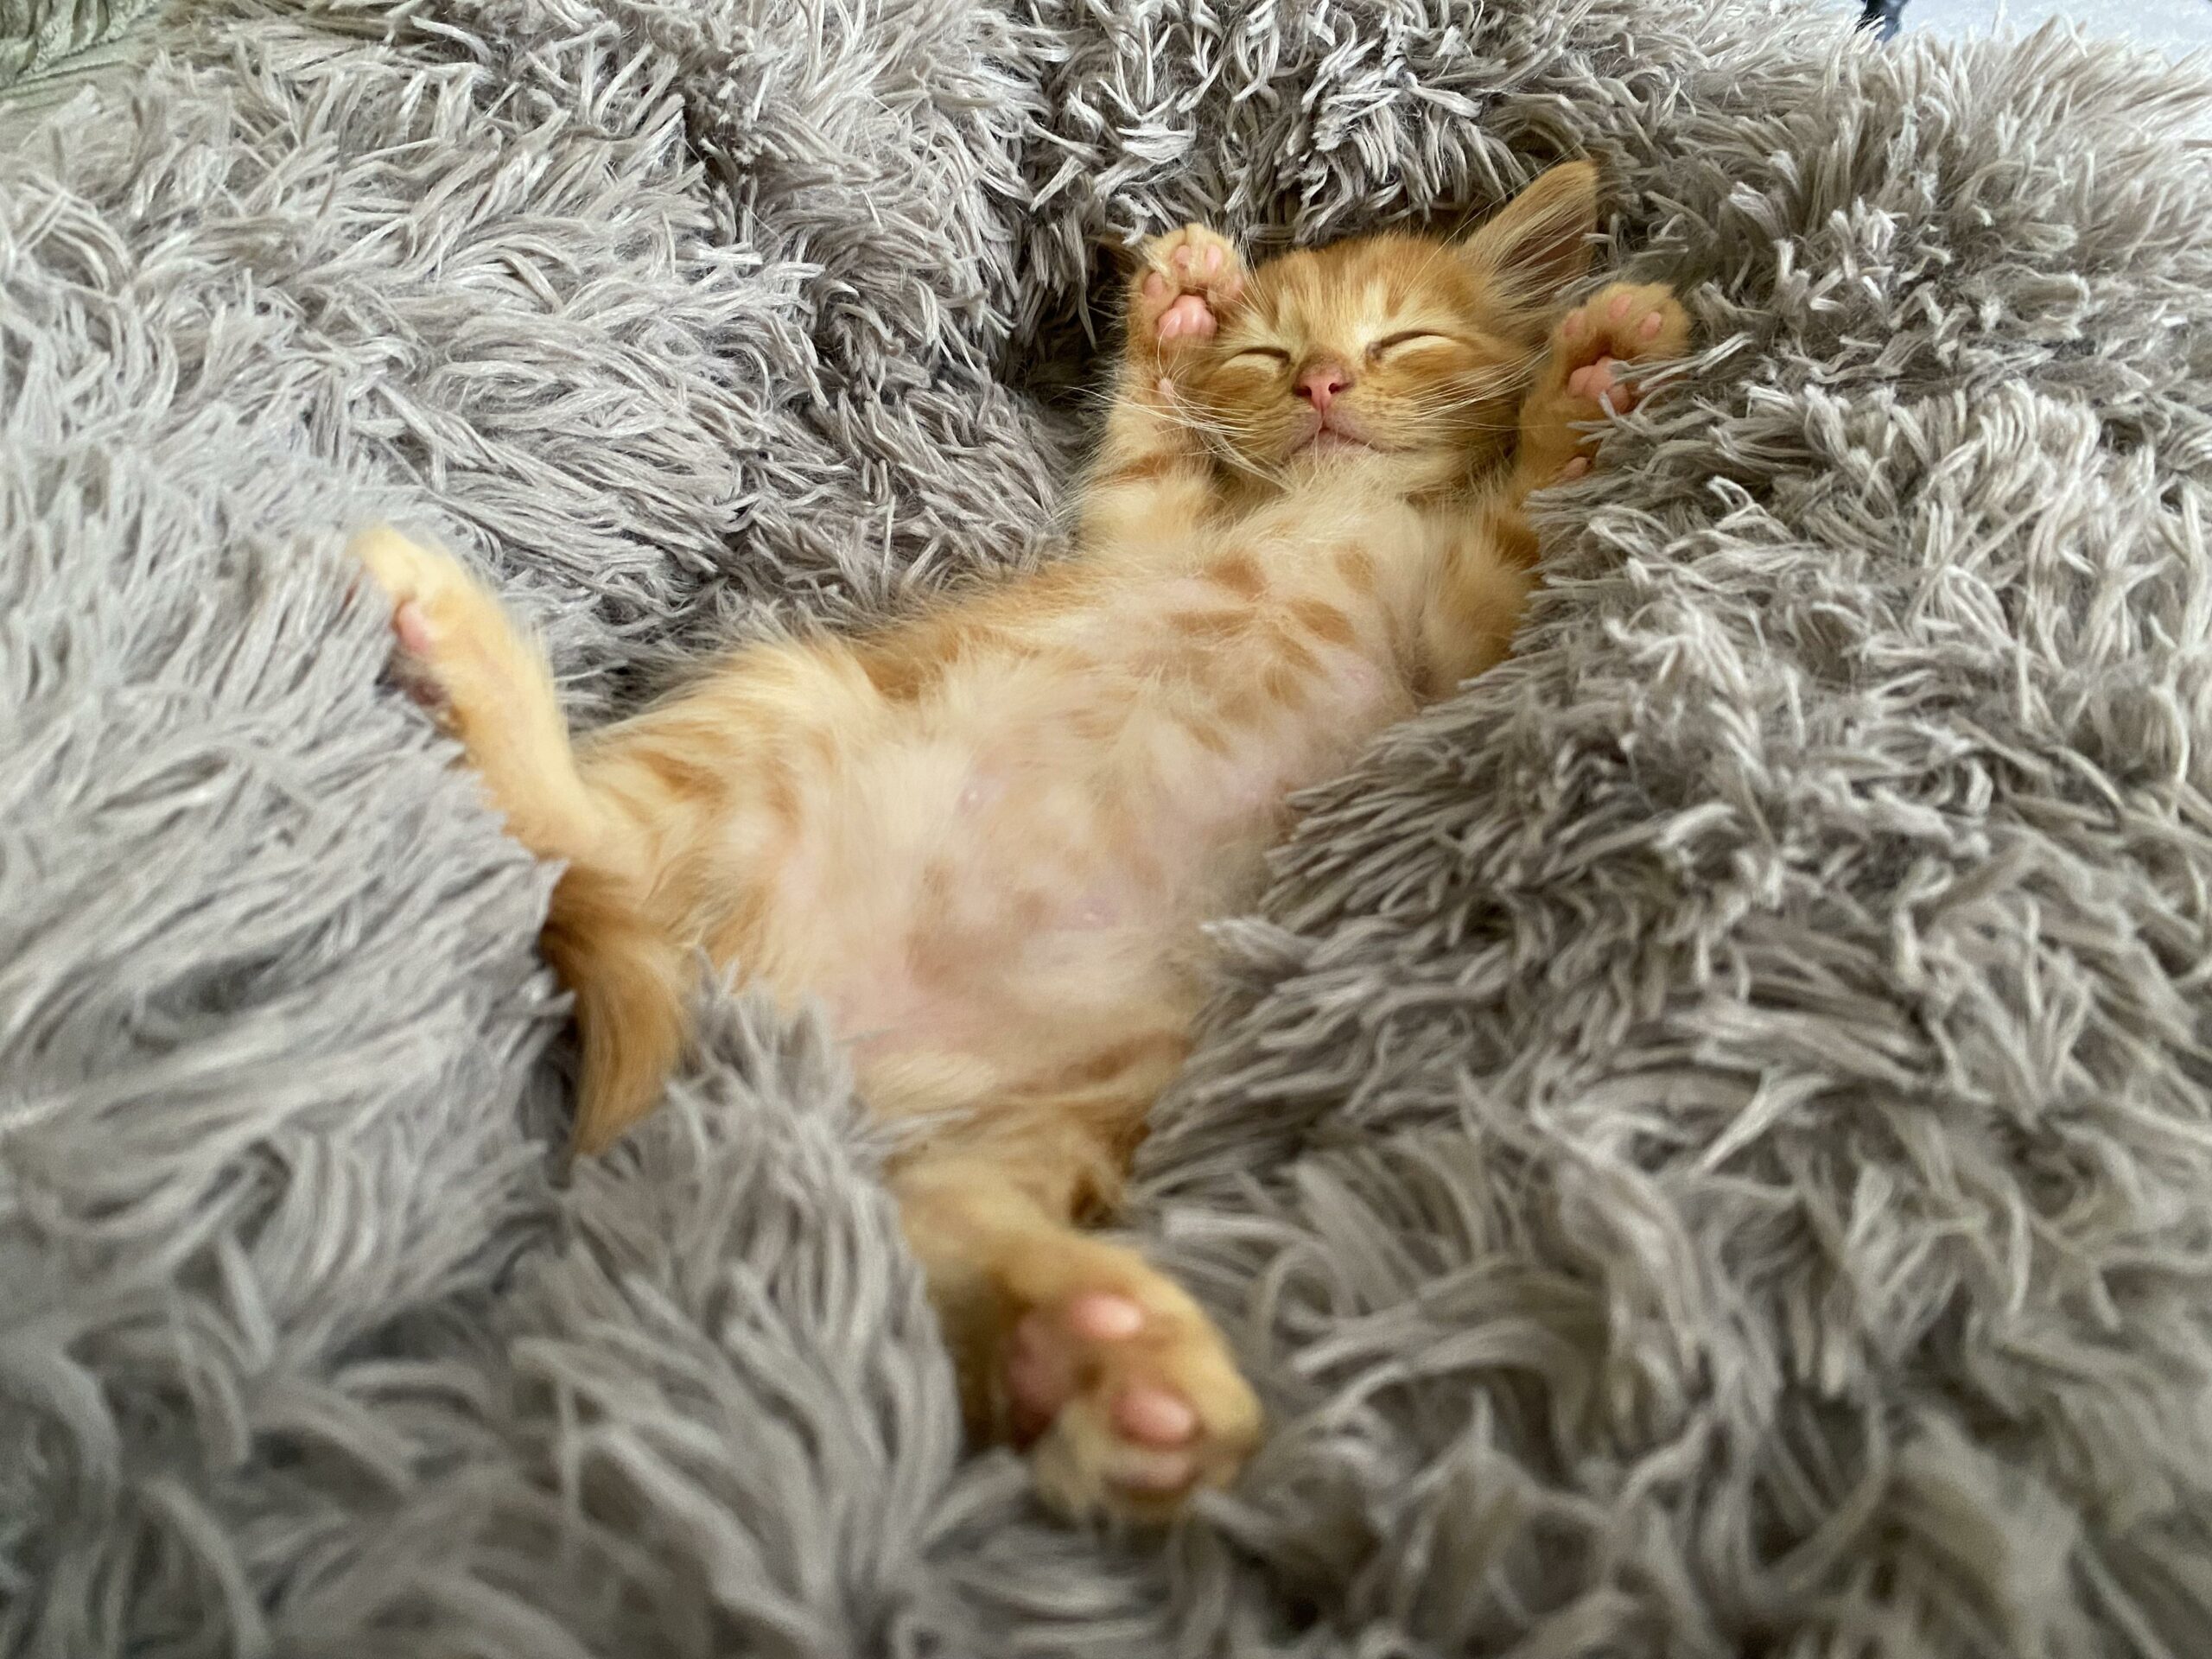 orange kitten lying on his back on fluffy blanket. the kitten is smiling and looks very content.